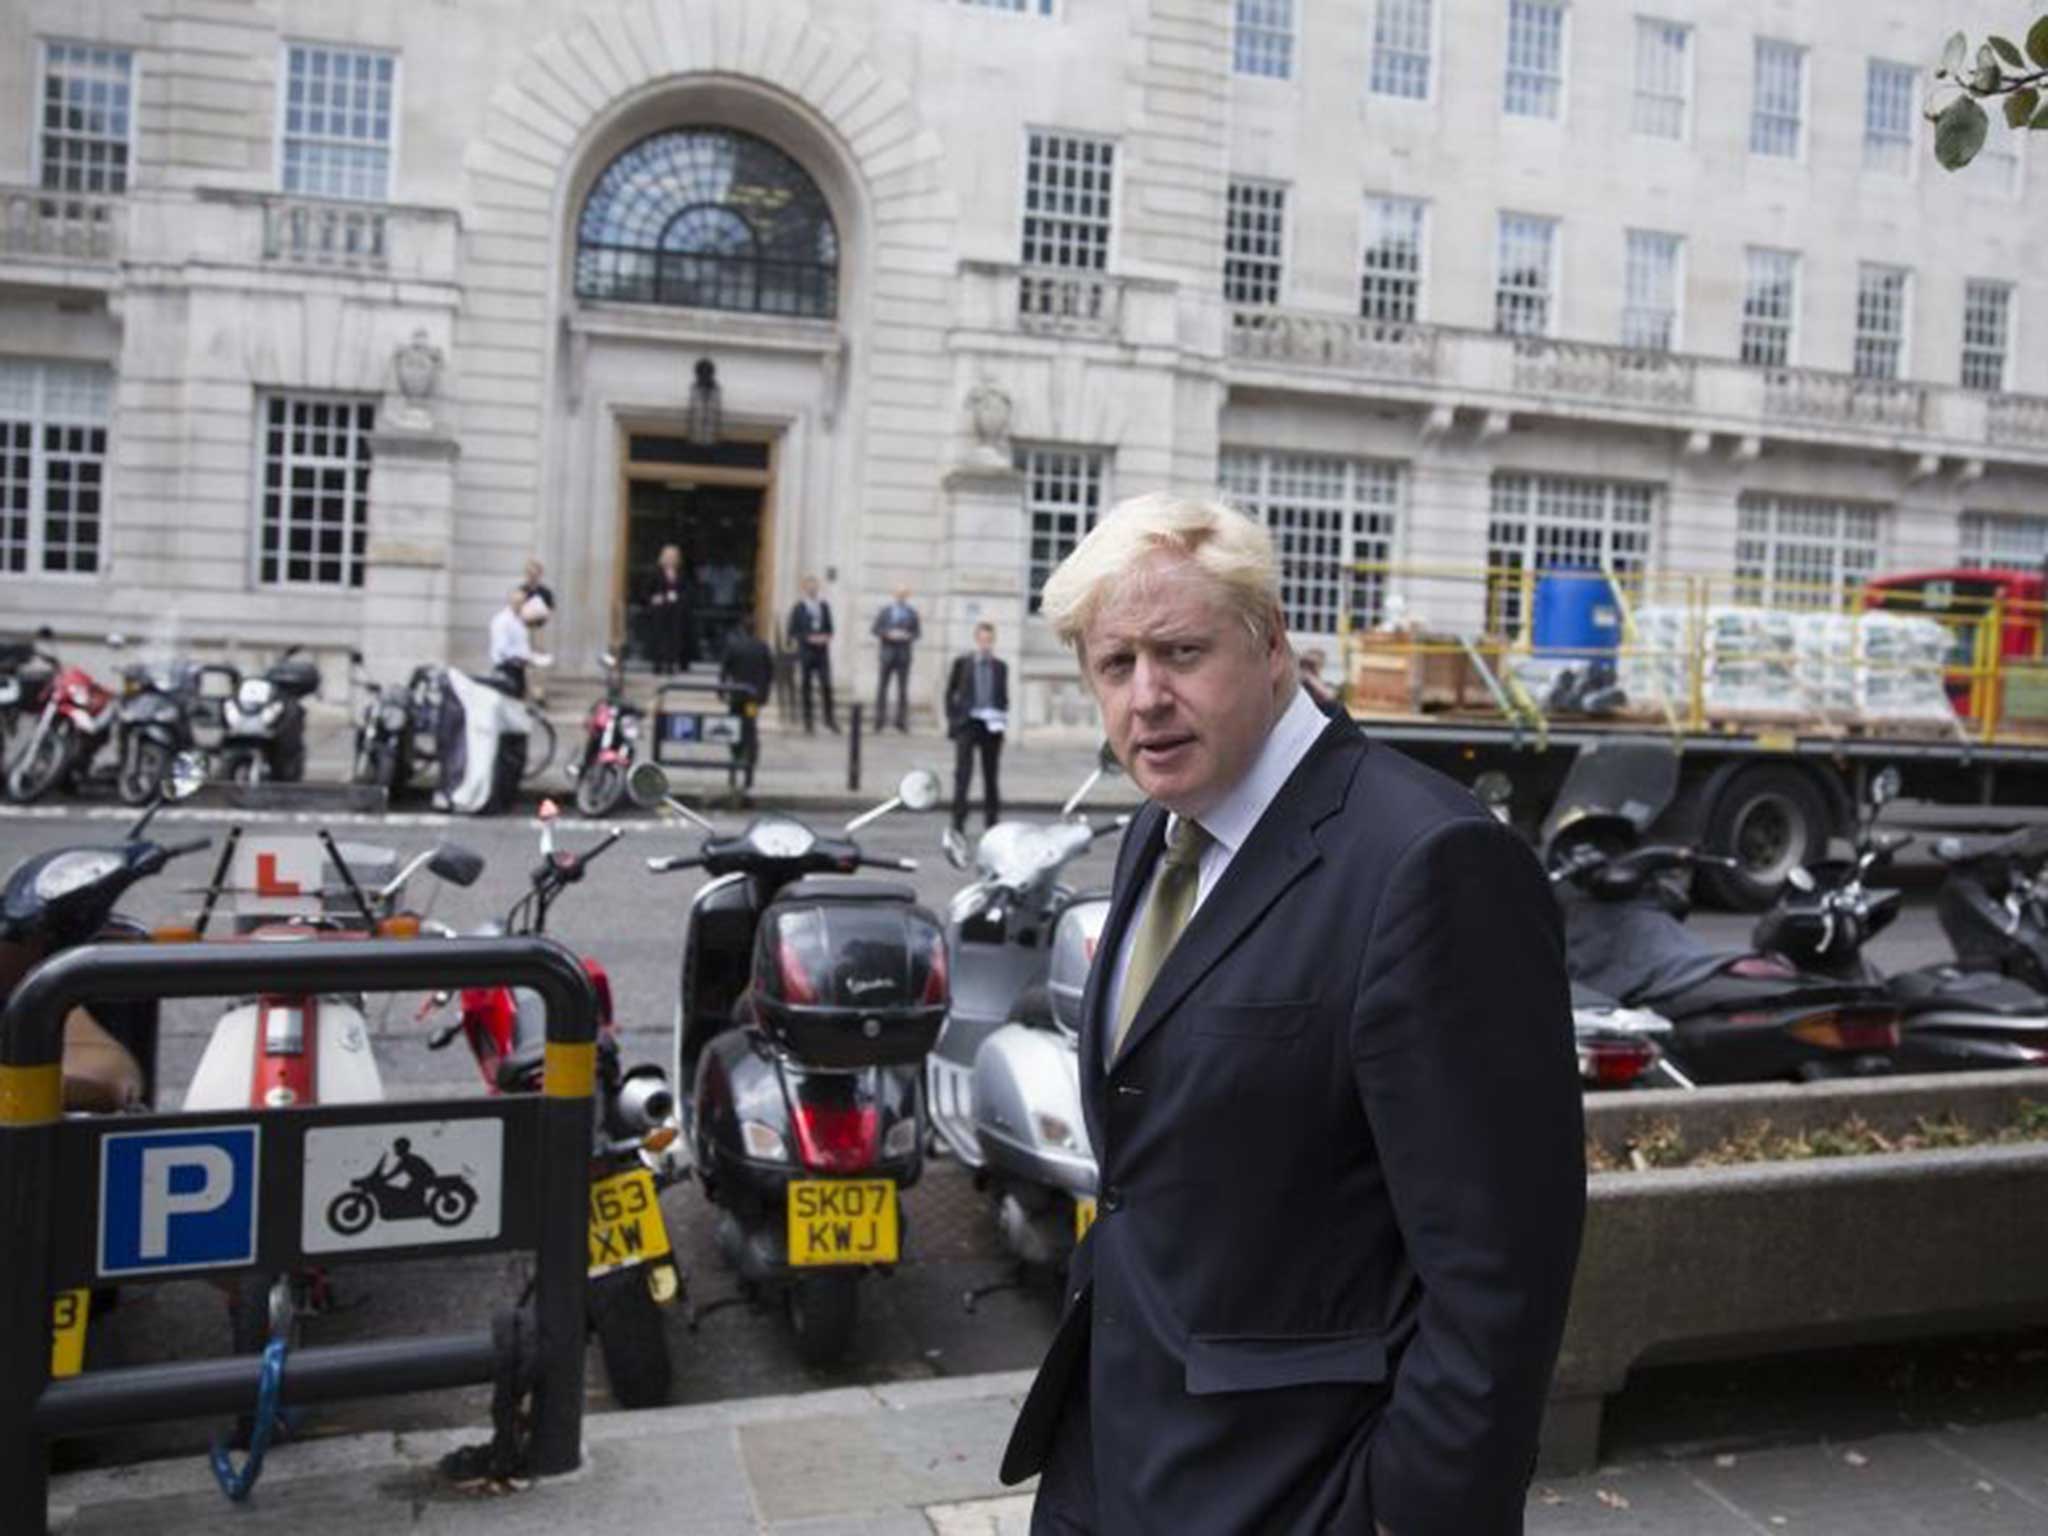 Boris Johnson promised to increase opportunities and increase access for the disabled